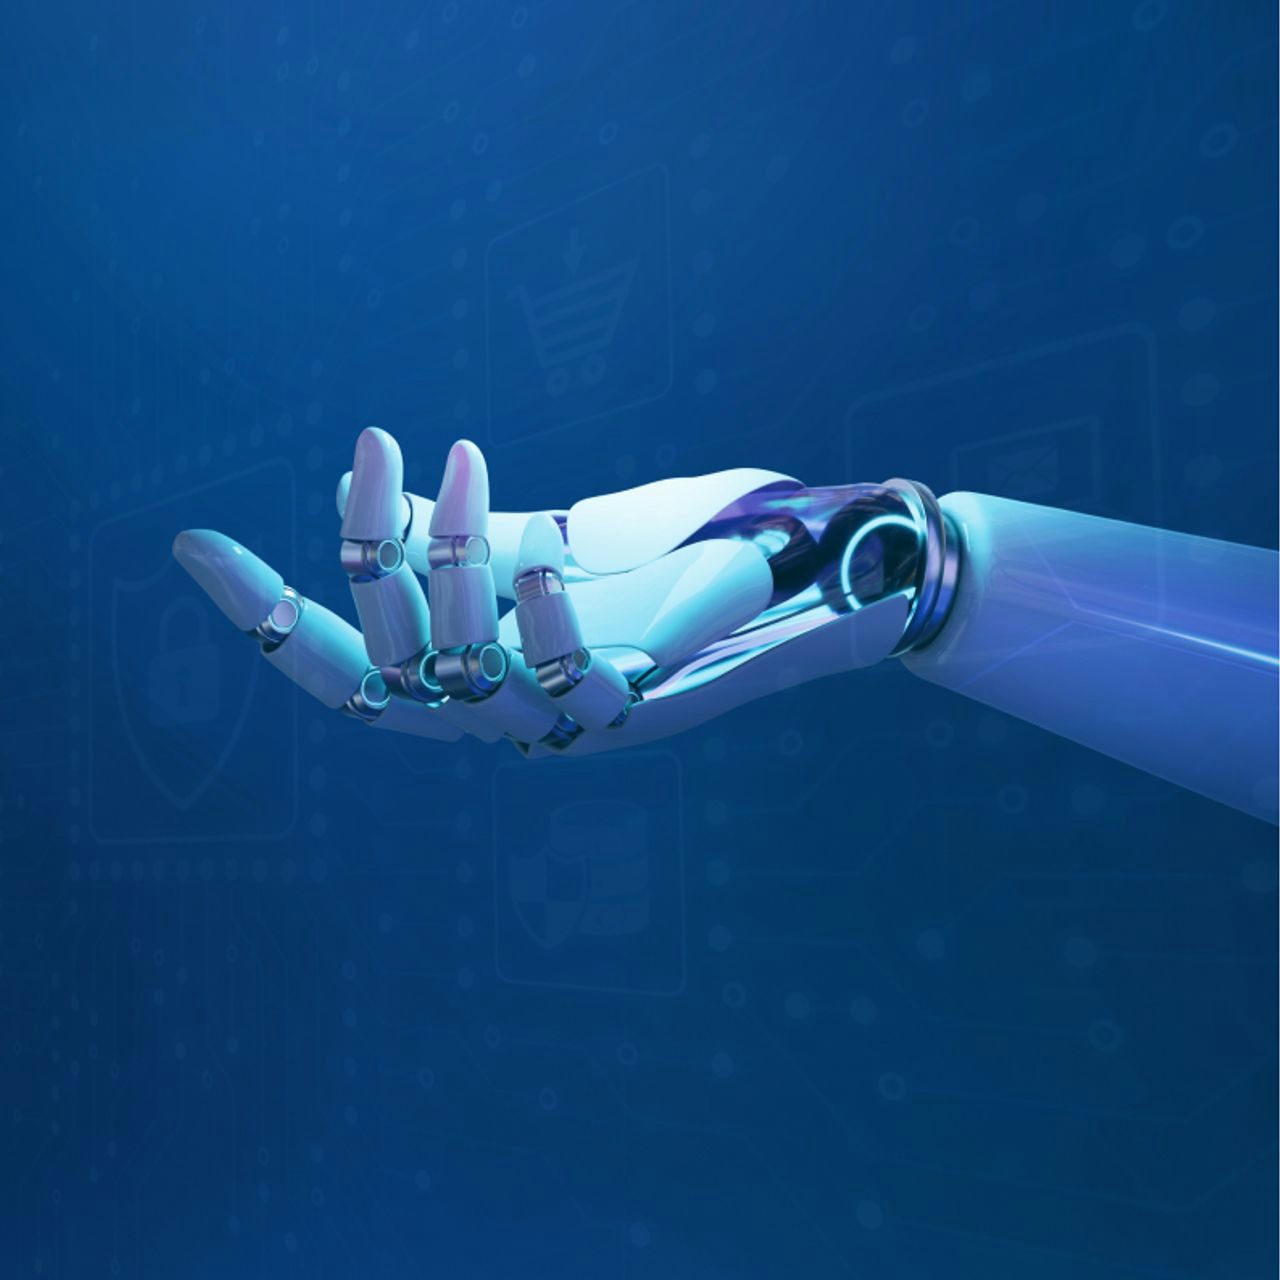 A 3D-rendered robotic hand with articulated fingers extended, set against a blue digital background with floating interface icons, symbolising advanced technology and artificial intelligence.